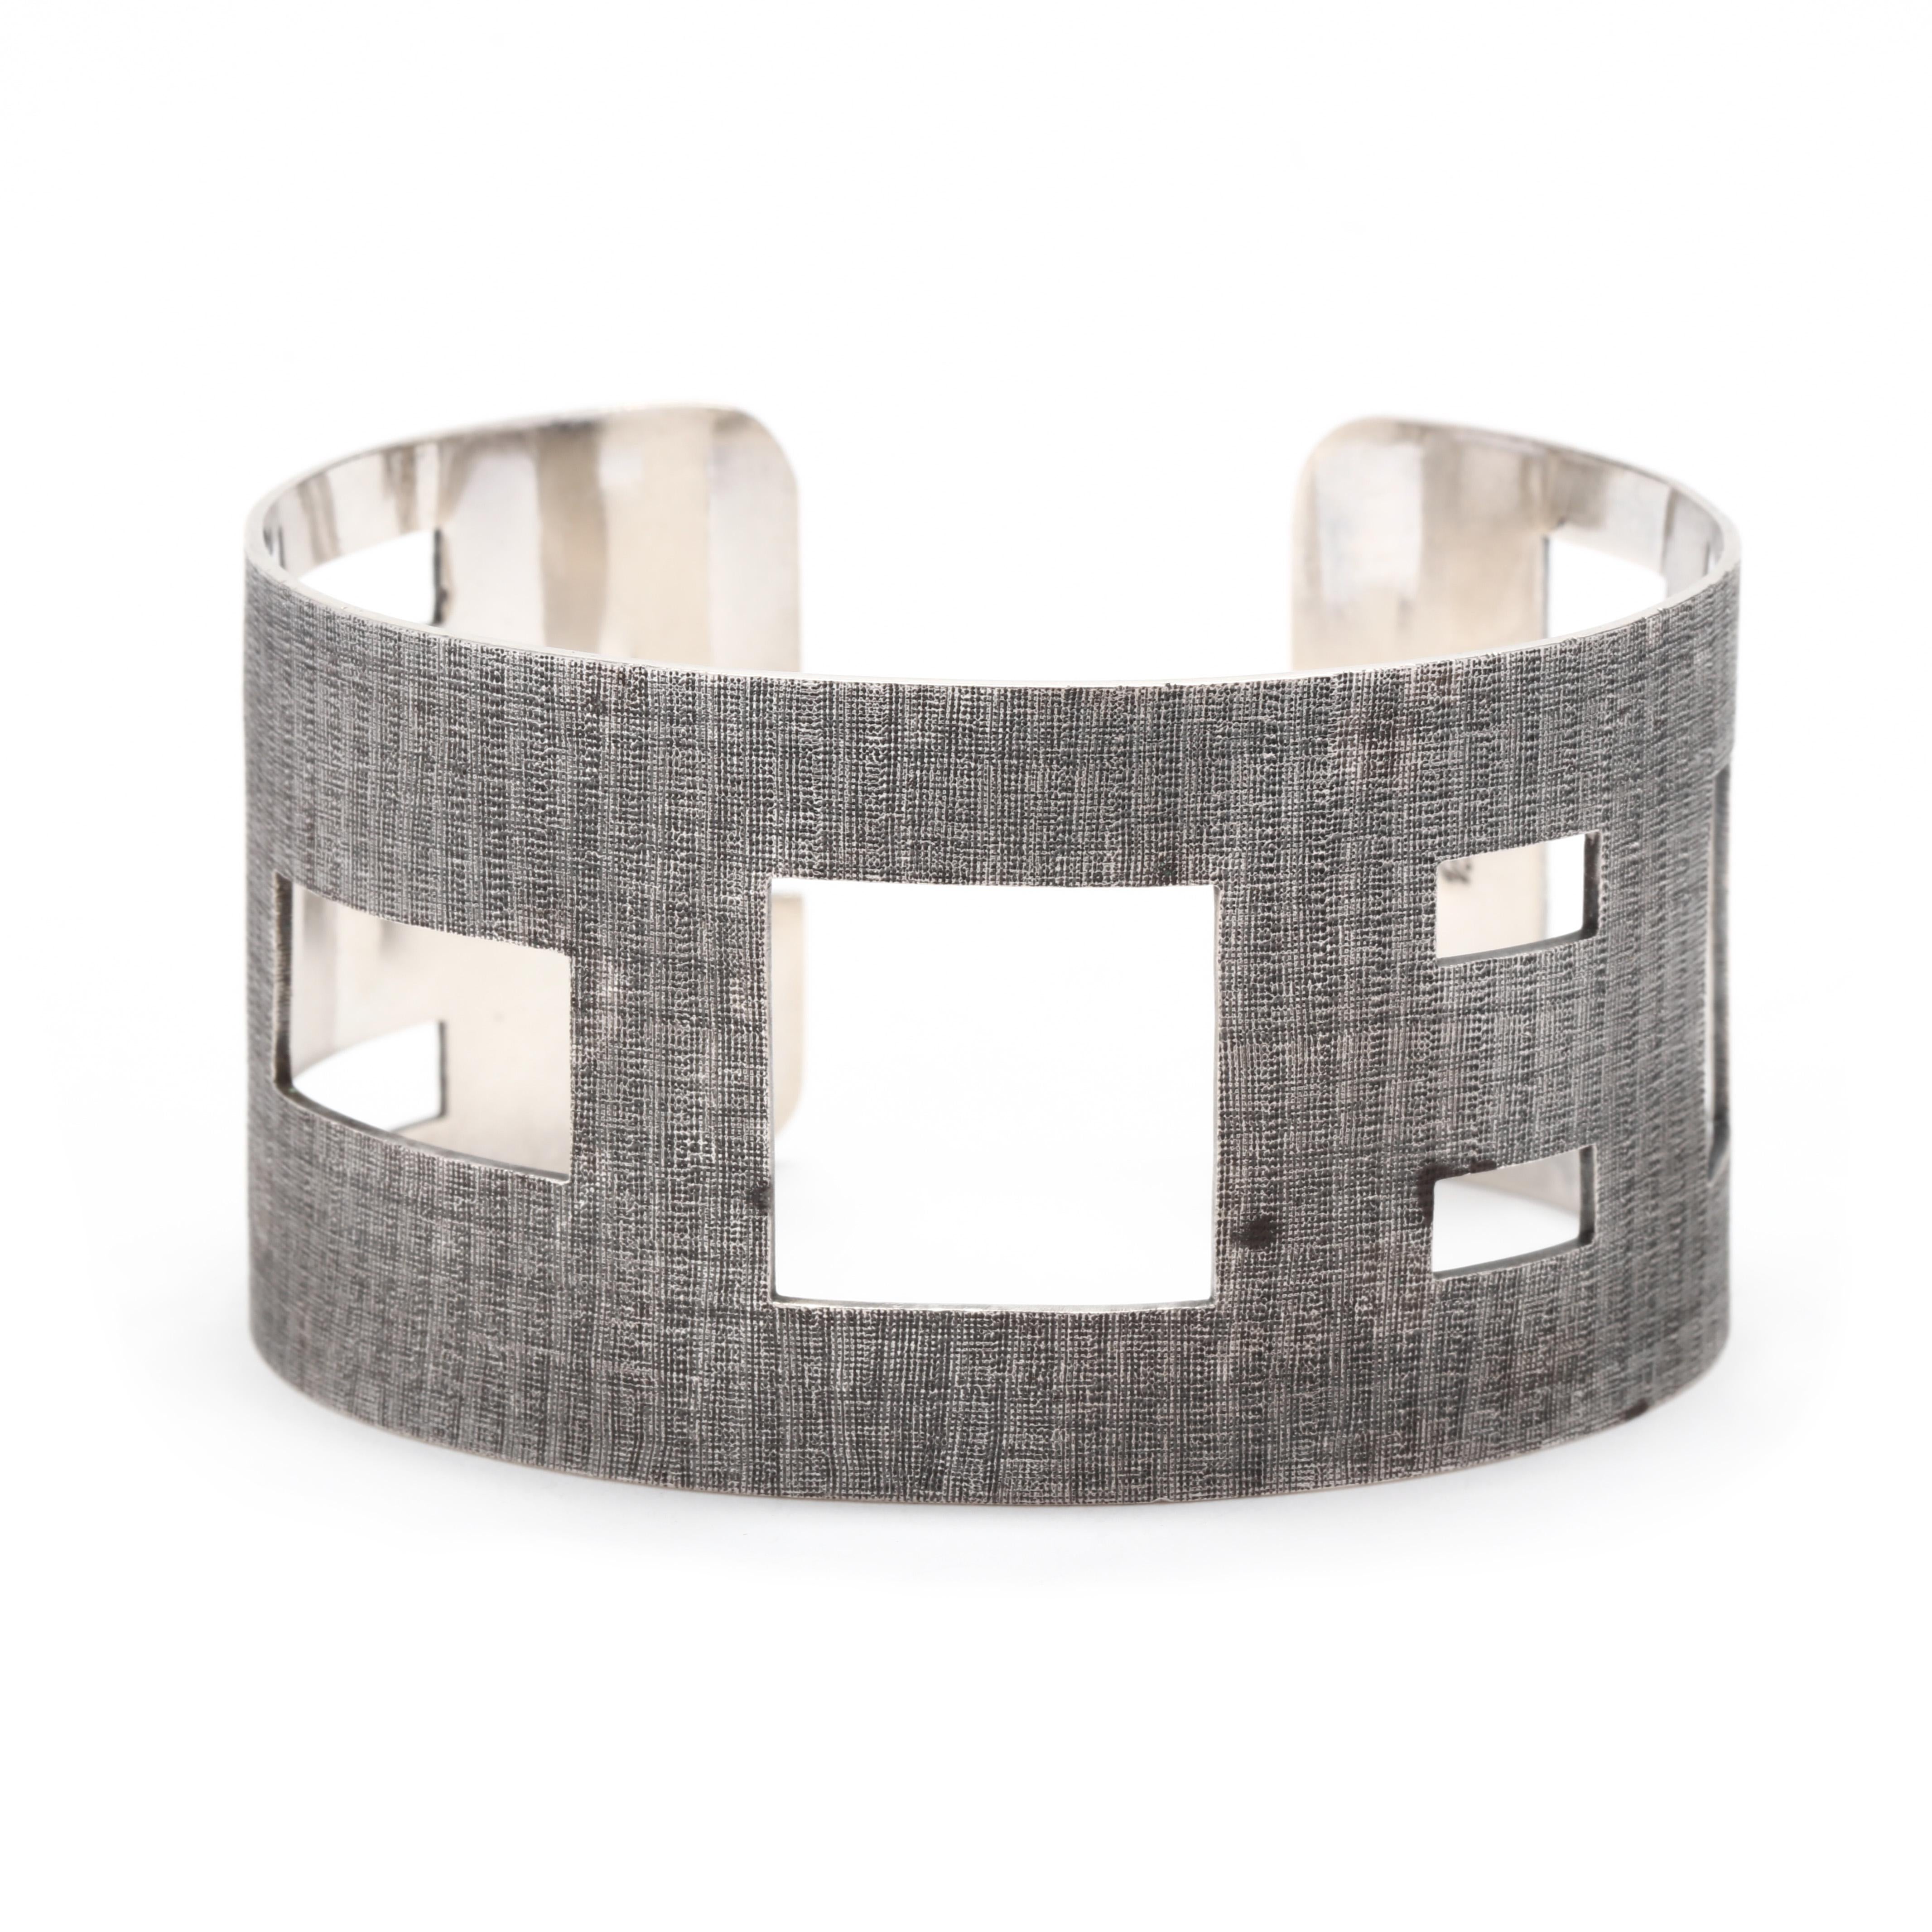 A vintage sterling silver geometric cut-out cuff bracelet.  This wide cuff bracelet features square and rectangular cut-outs of varying sizes, with a textured silver finish. It is stamped Sterling PS Diane.

Length: 7.5 inches with a 7.8 inch